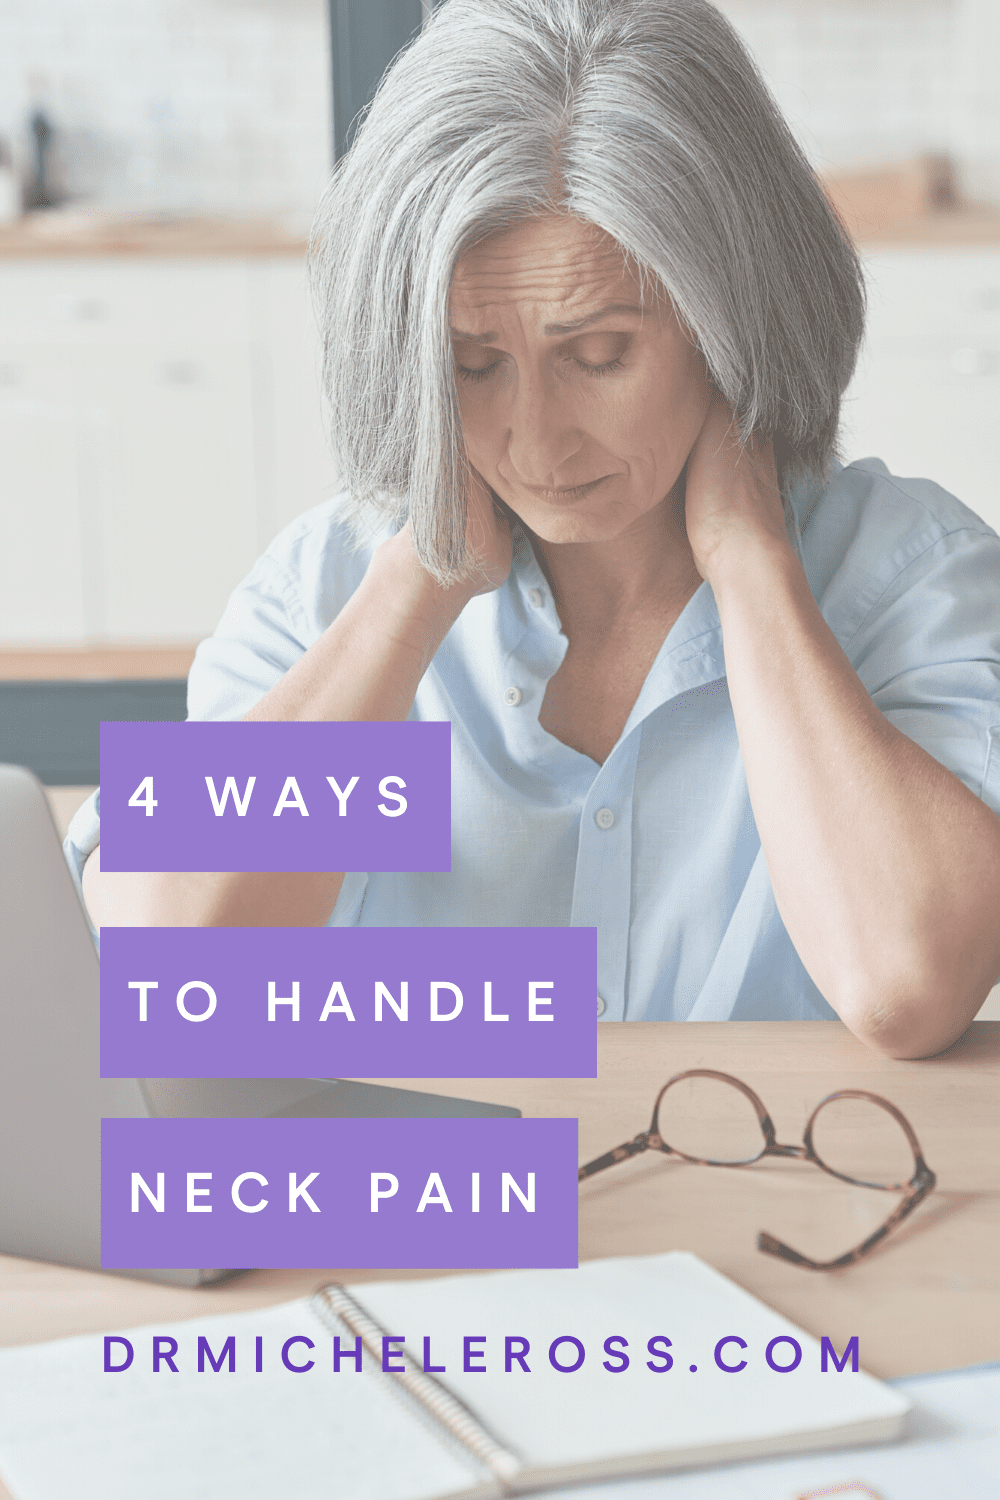 4 Ways To Handle Neck Pain Naturally